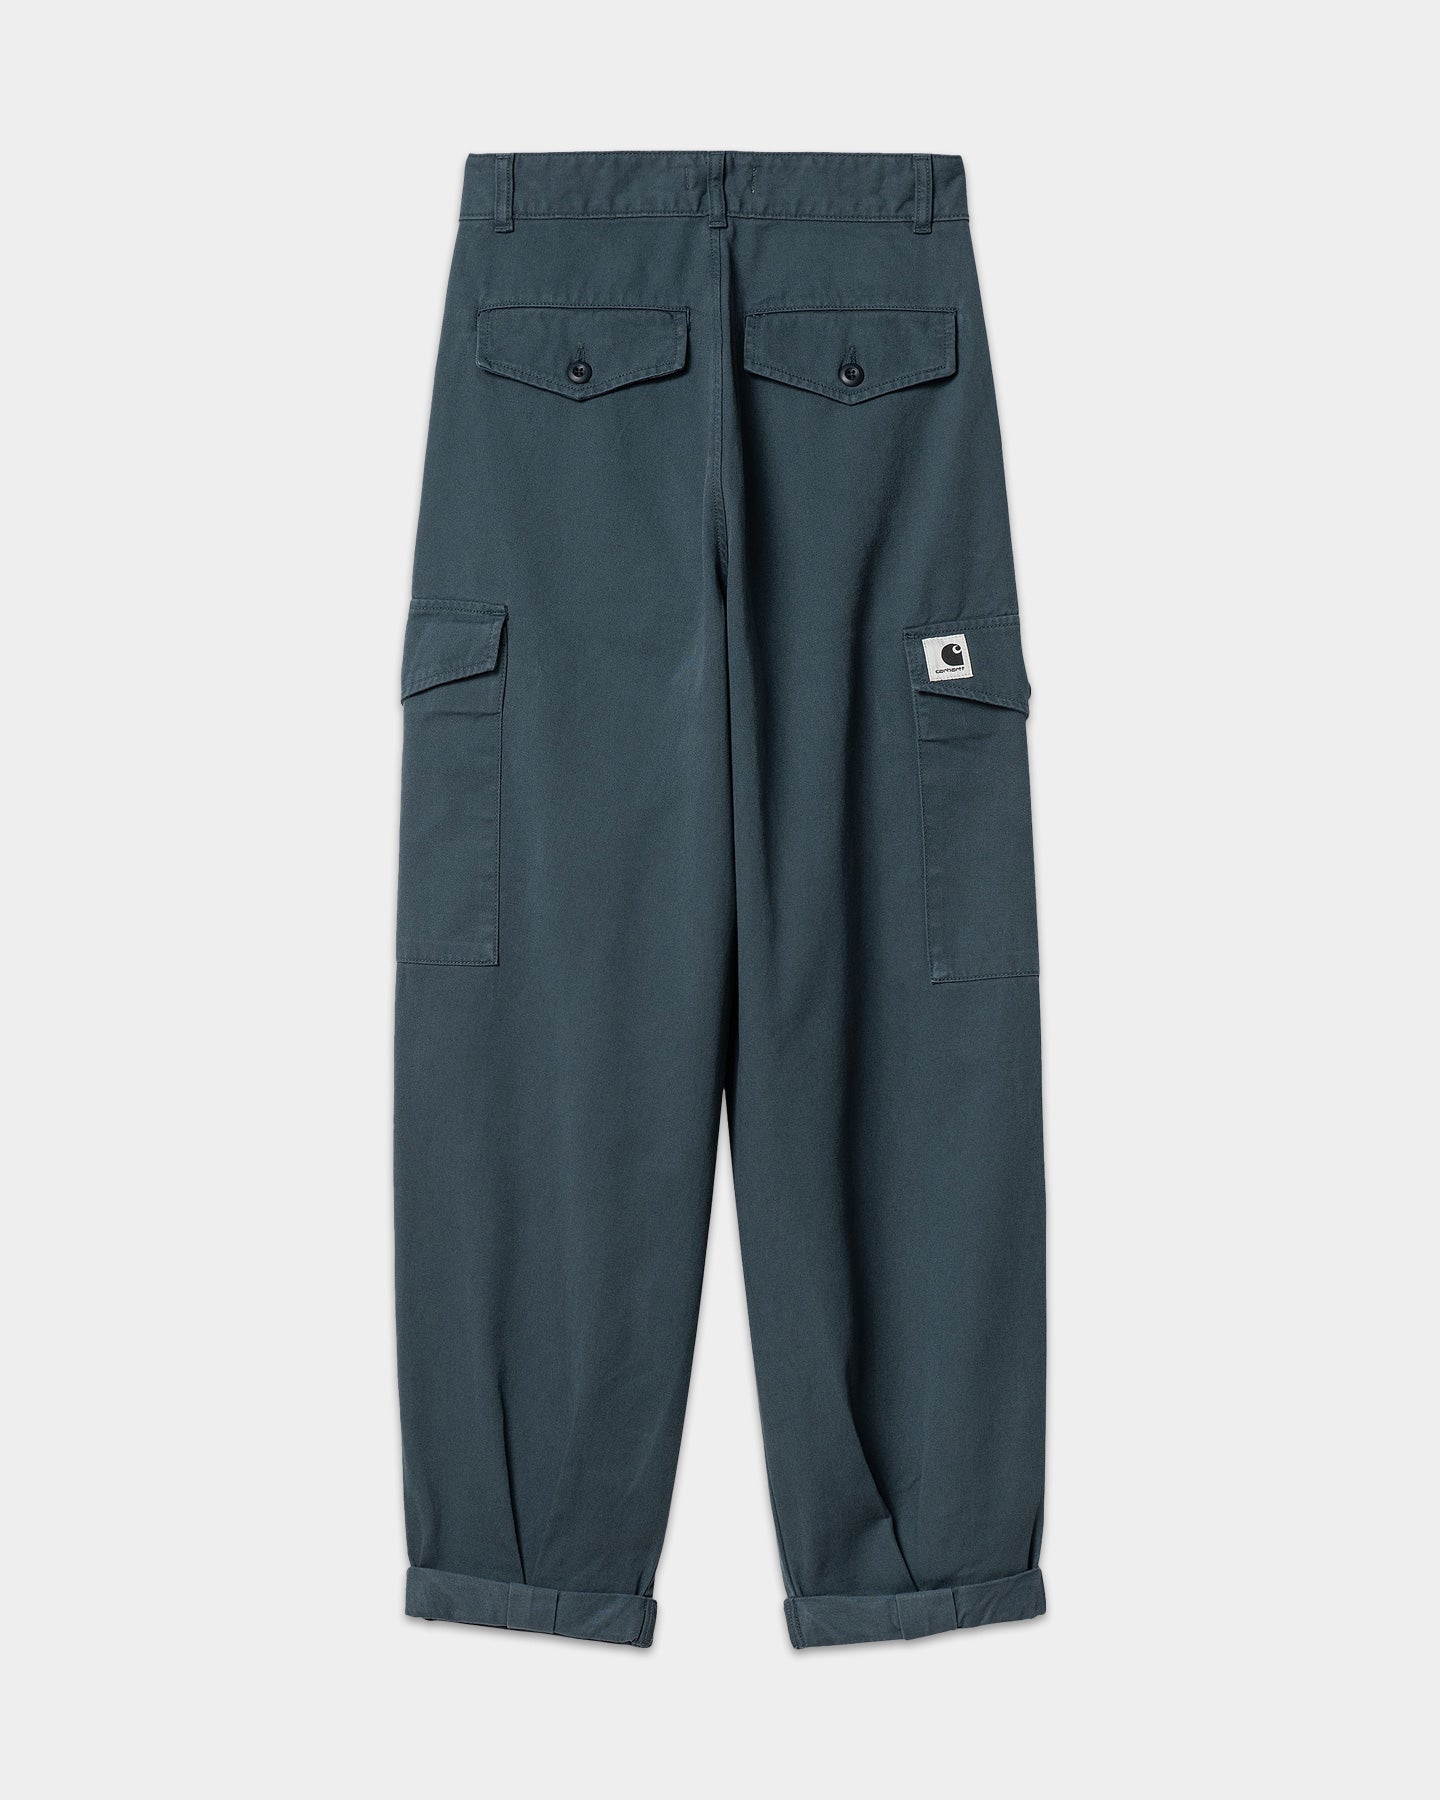 W' COLLINS PANT - ore (garment dyed)